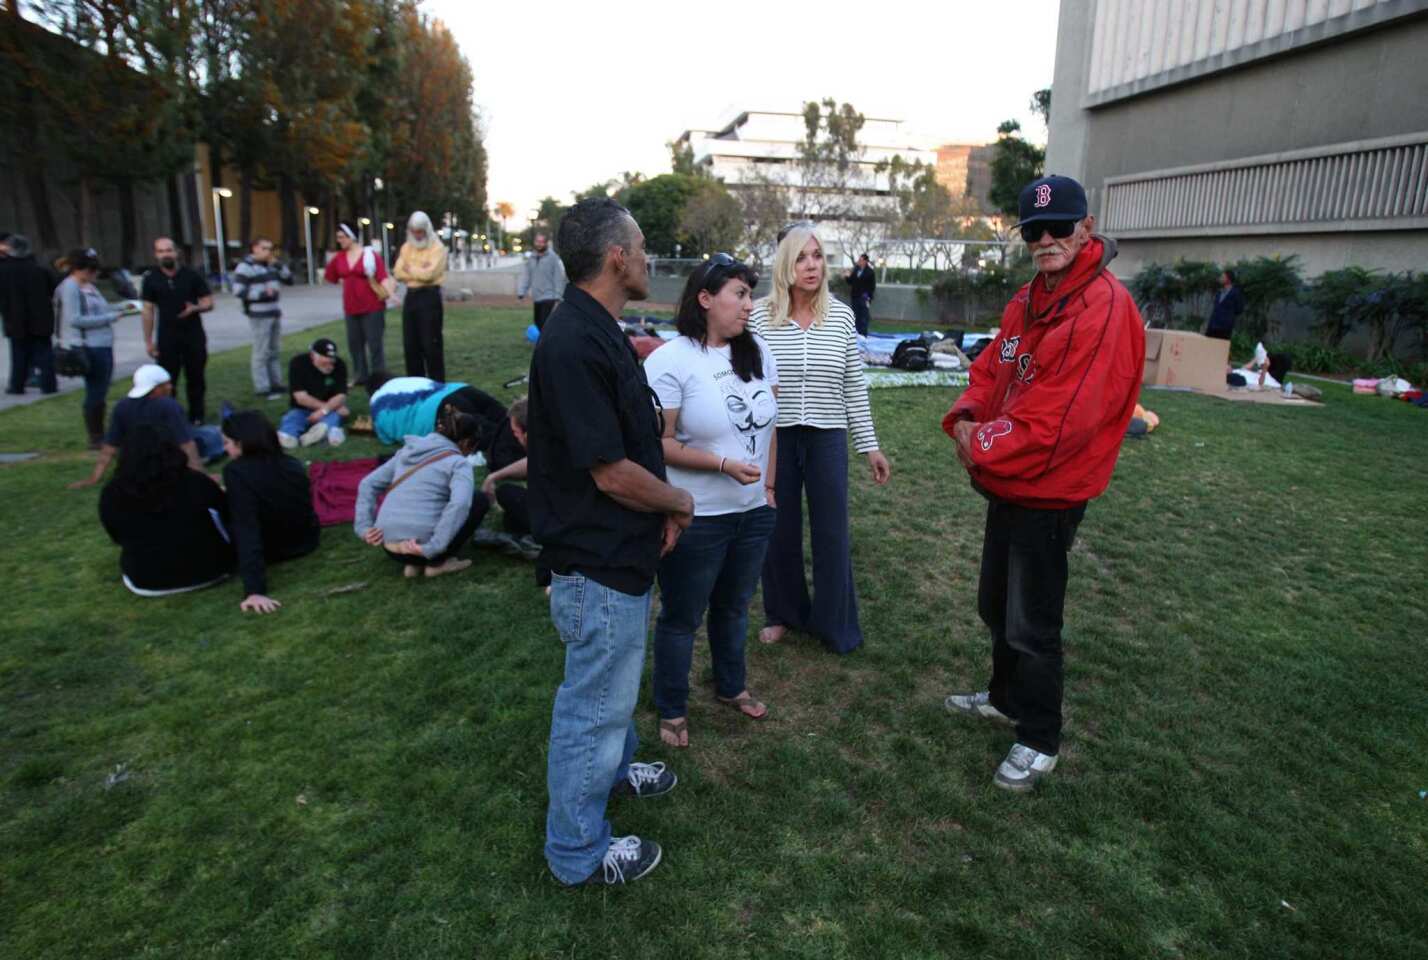 At Necessity Village, Occupy Santa Ana members talk to Jim "Boston" Watson, 66, right, who has been homeless on and off for 30 years.